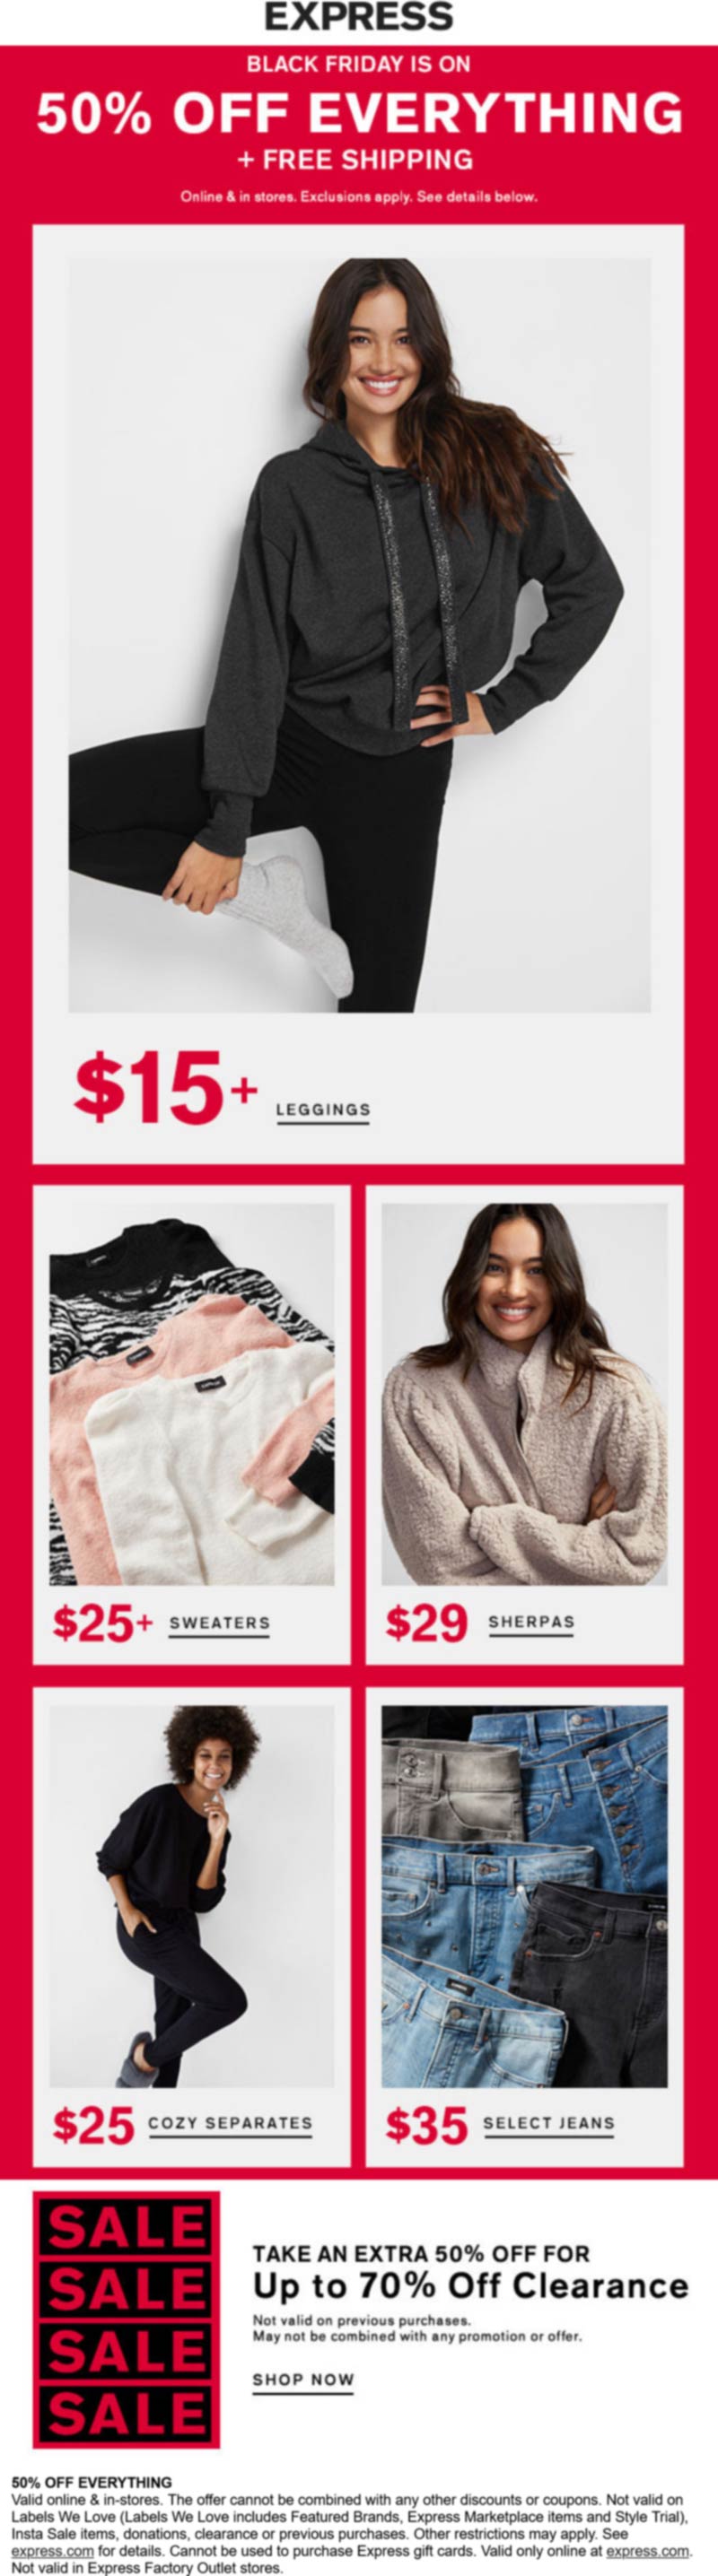 Express stores Coupon  50% off everything at Express, ditto online #express 